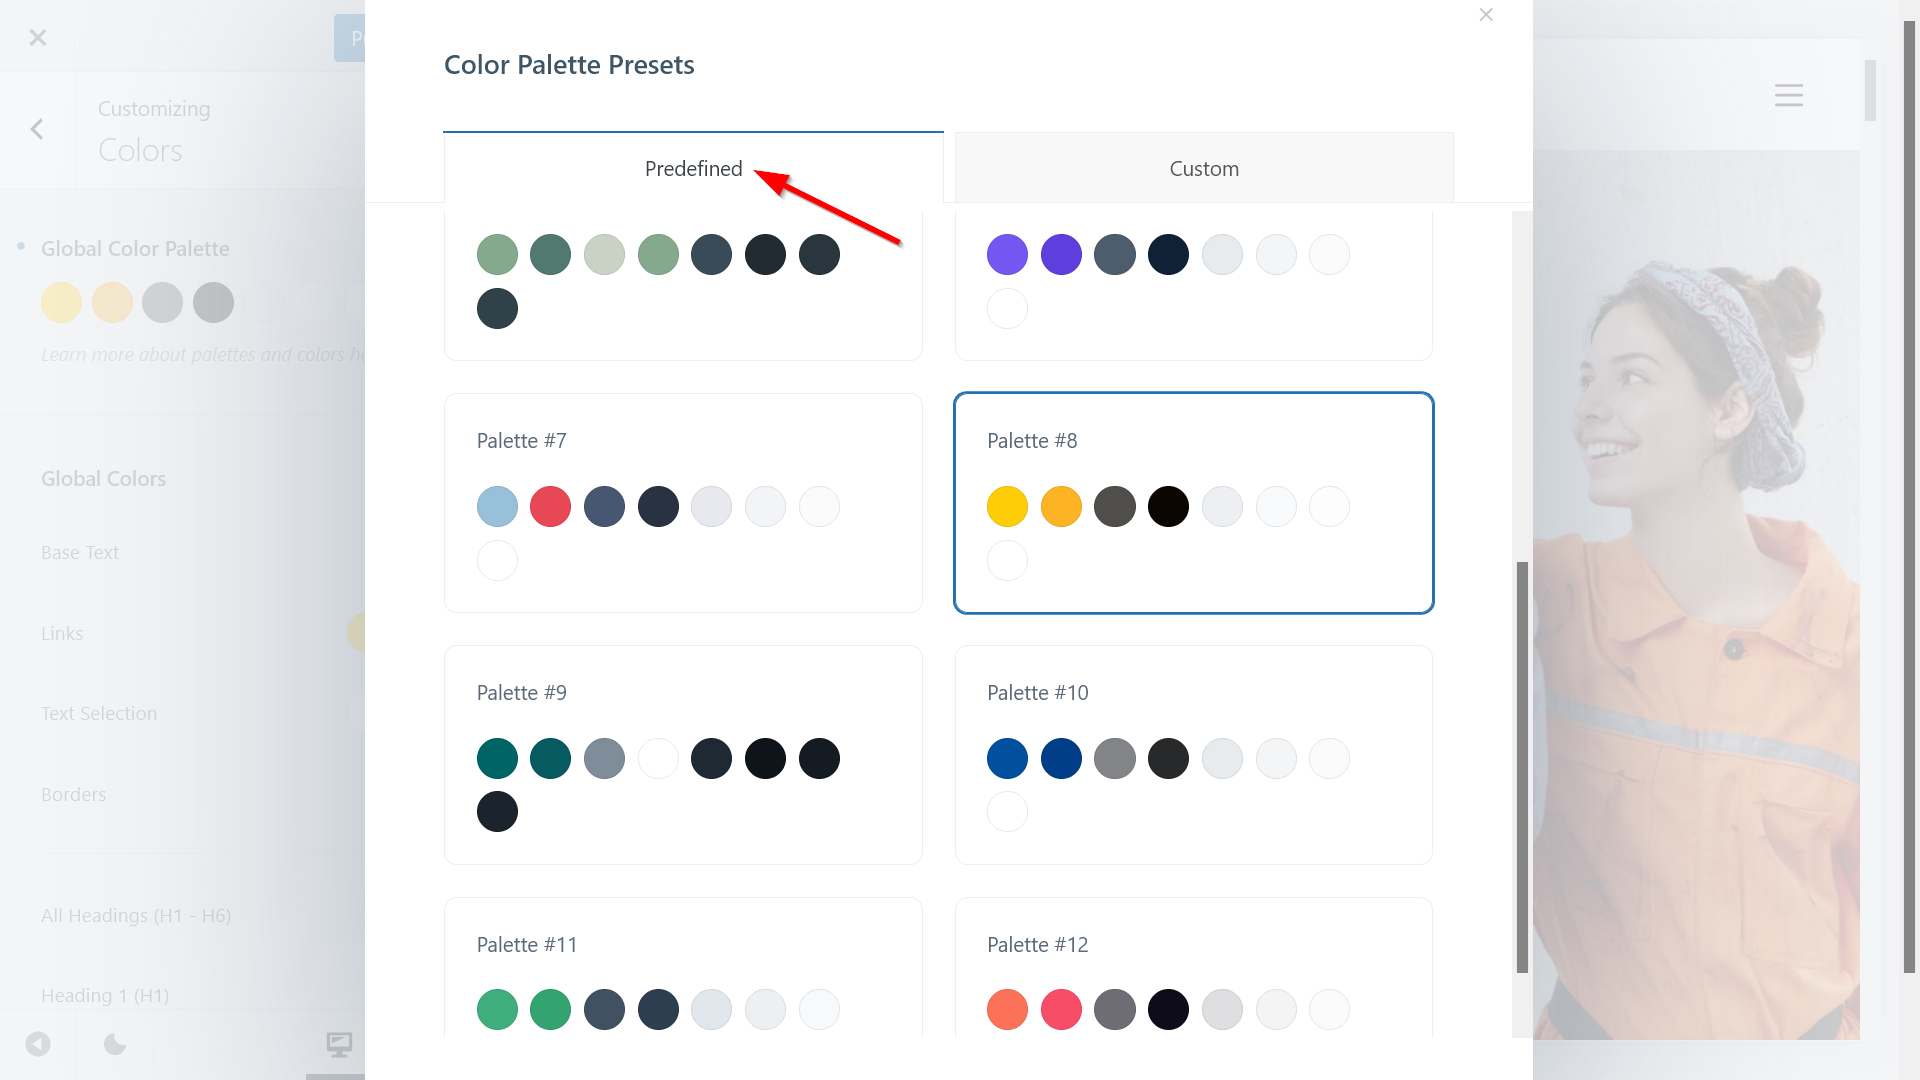 The Predefined tab of the Color Palette Presets modal